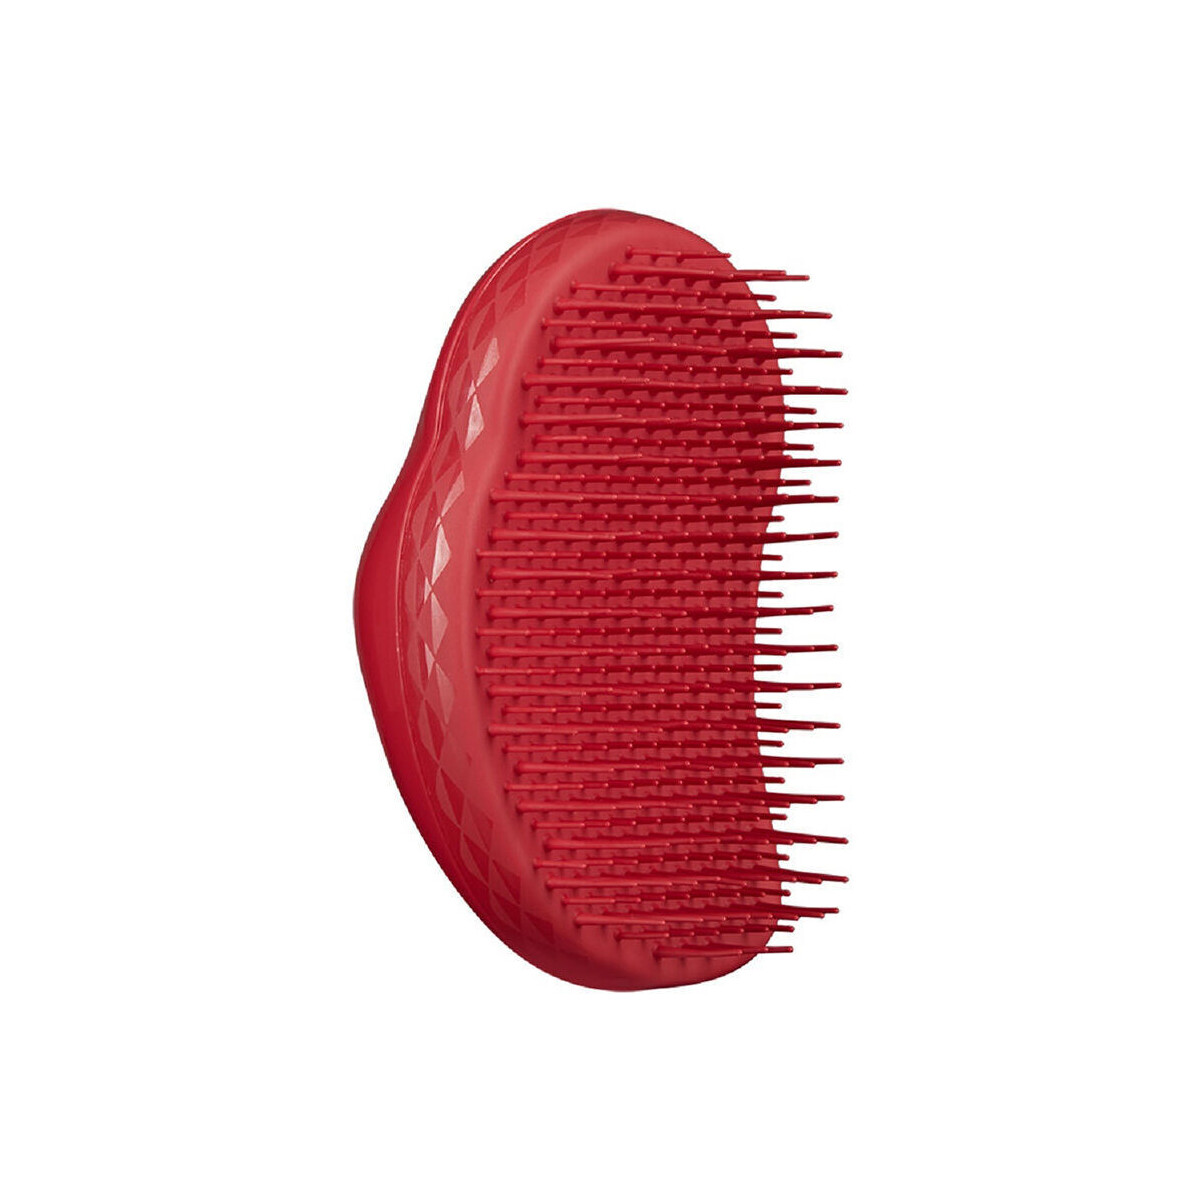 Belleza Tratamiento capilar Tangle Teezer Thick & Curly salsa Red 